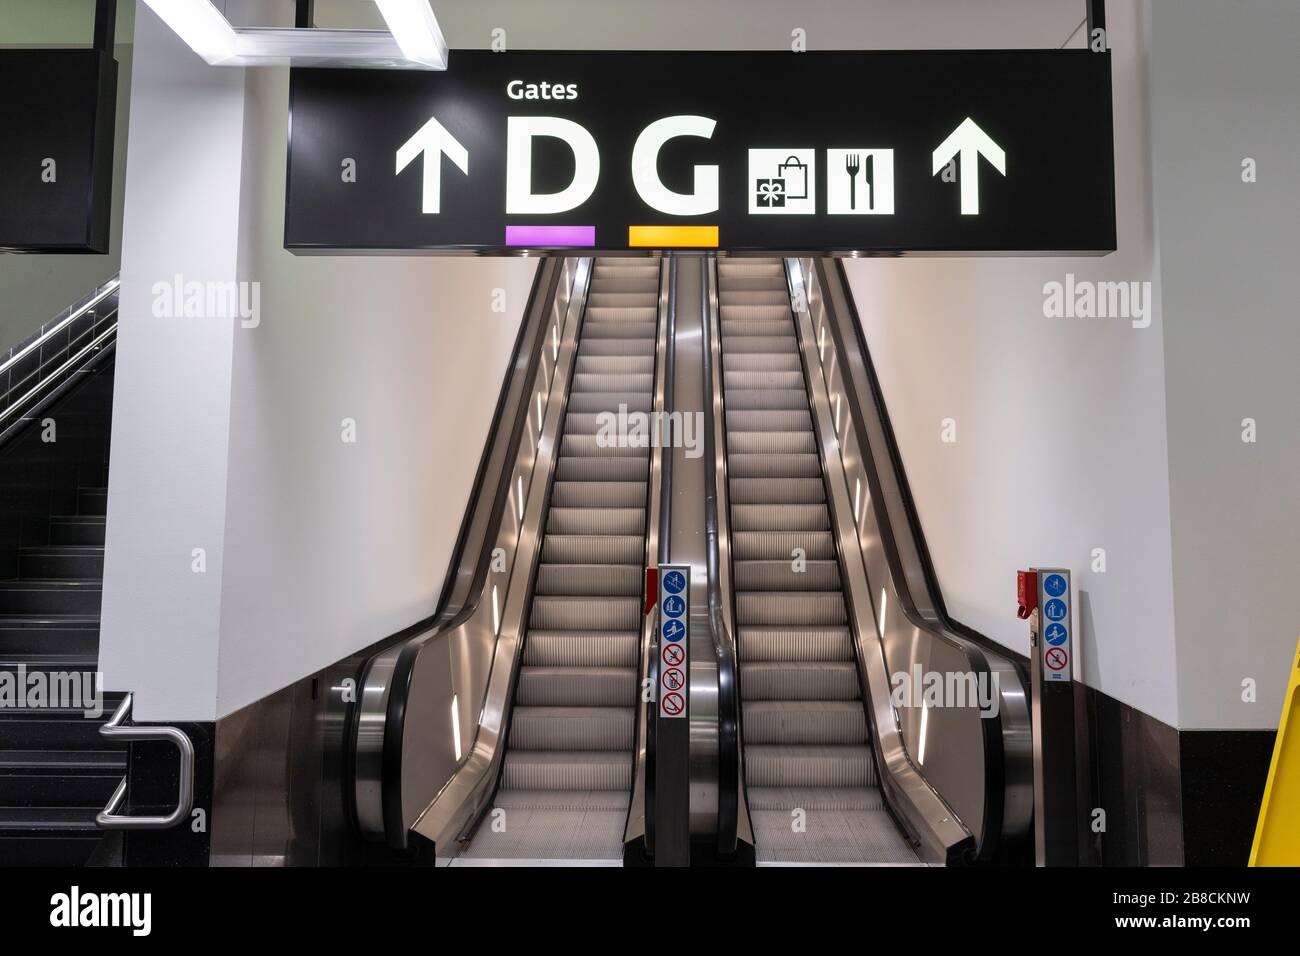 Sign showing gate locations and escalators to departure gates at Terminal 3, Vienna Airport, Austria. Theme: air travel Stock Photo